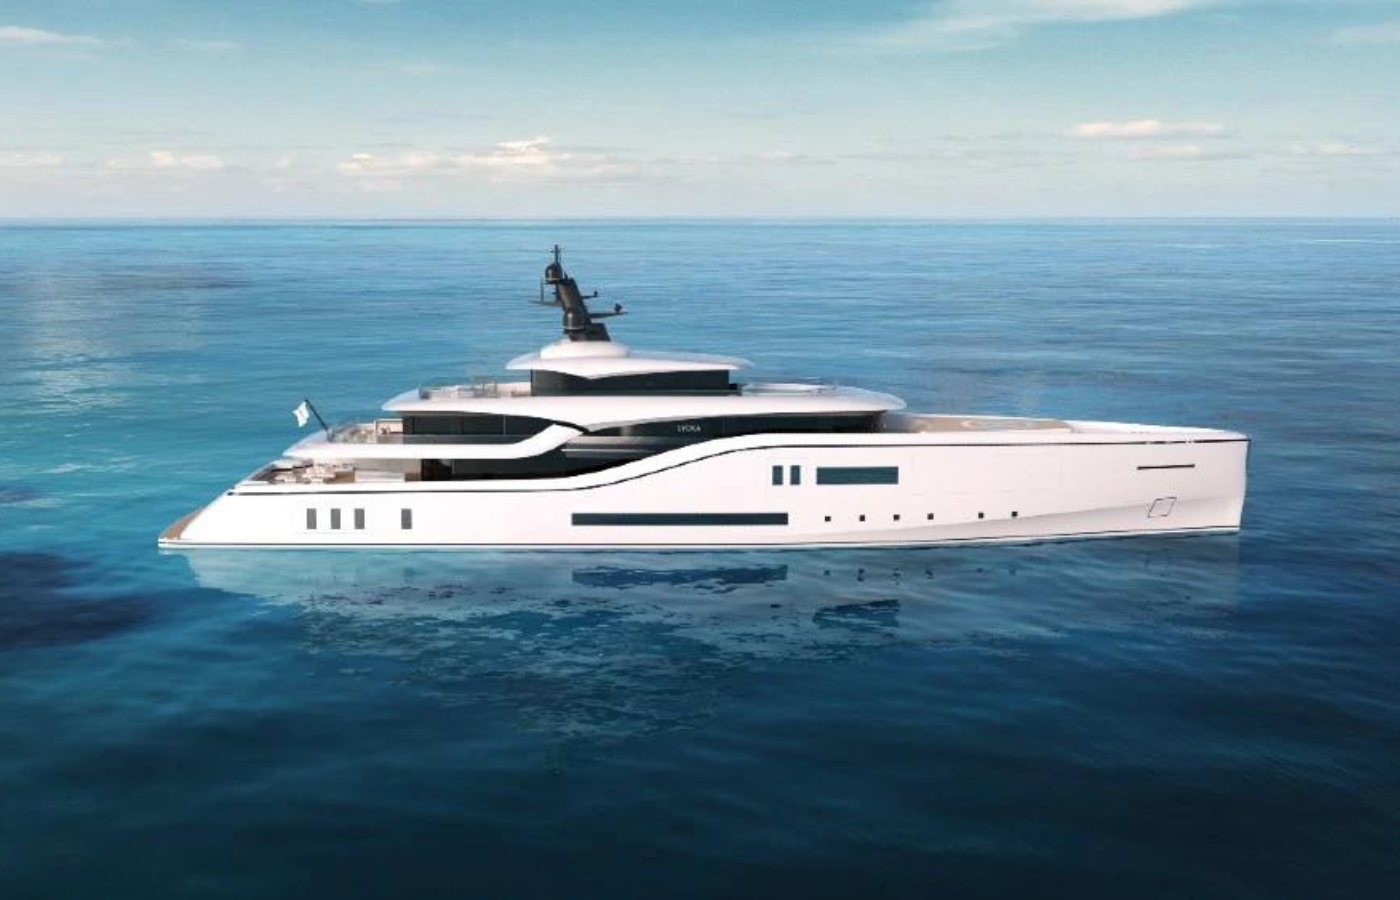 This Future-Proof 253-Foot Superyacht Concept Was Made to Run on Diesel, Hydrogen or Biofuels [In the News]